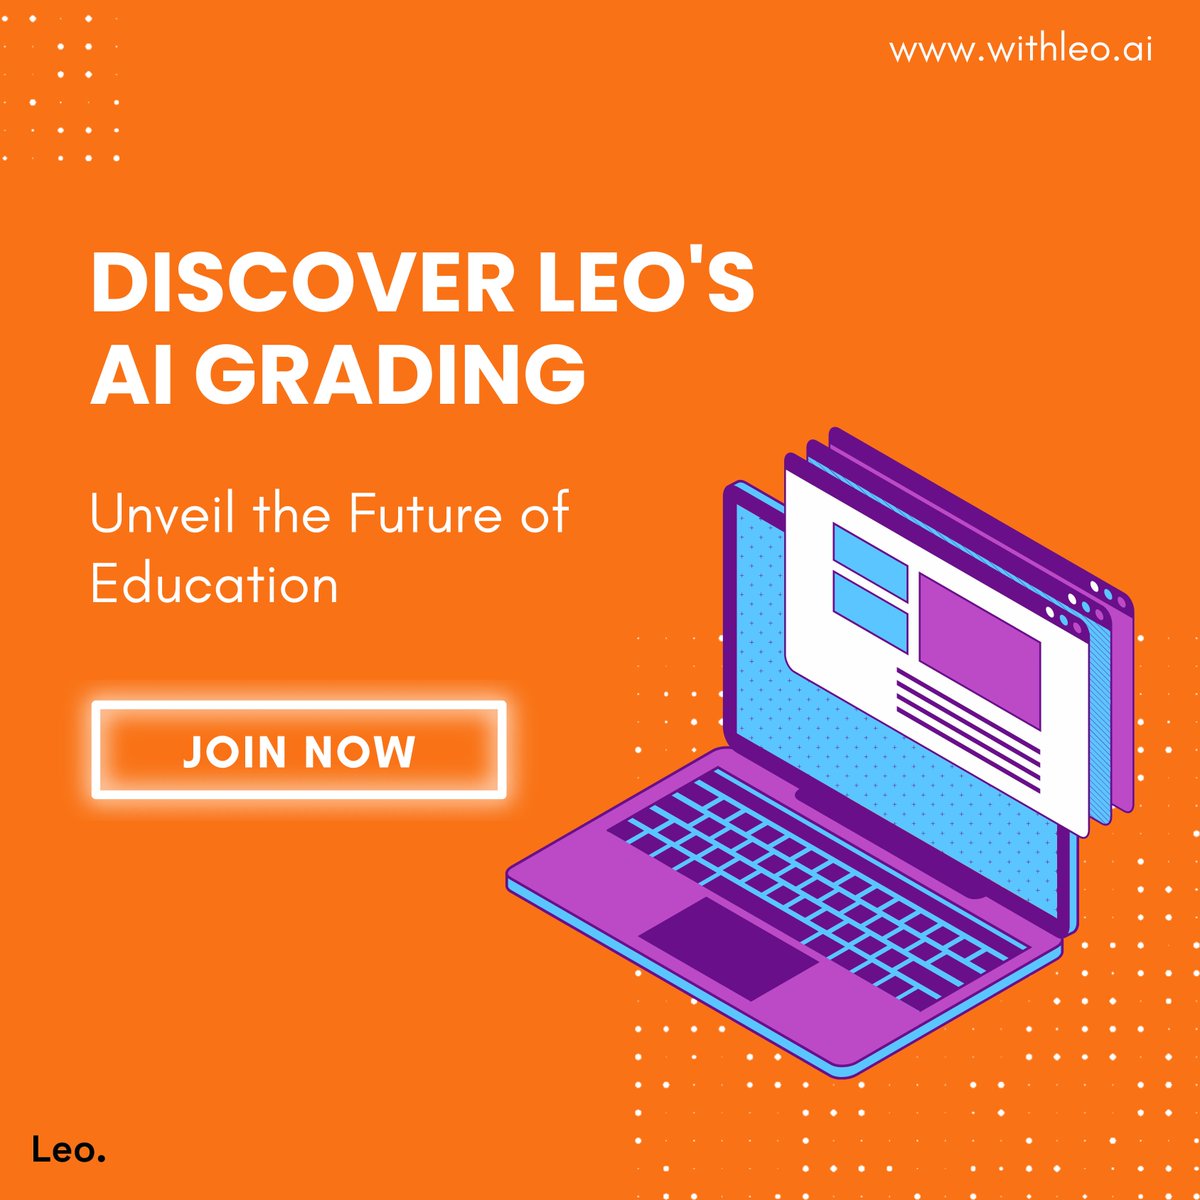 Discover the AI grading tech of Leo at withleo.ai: it evaluates student submissions using NLP and ML for fair, consistent grading, adapting over time.

#AI #edtech #education #teaching #AIinEducation #TeacherTools #TeachingAssistants #EducationalAI